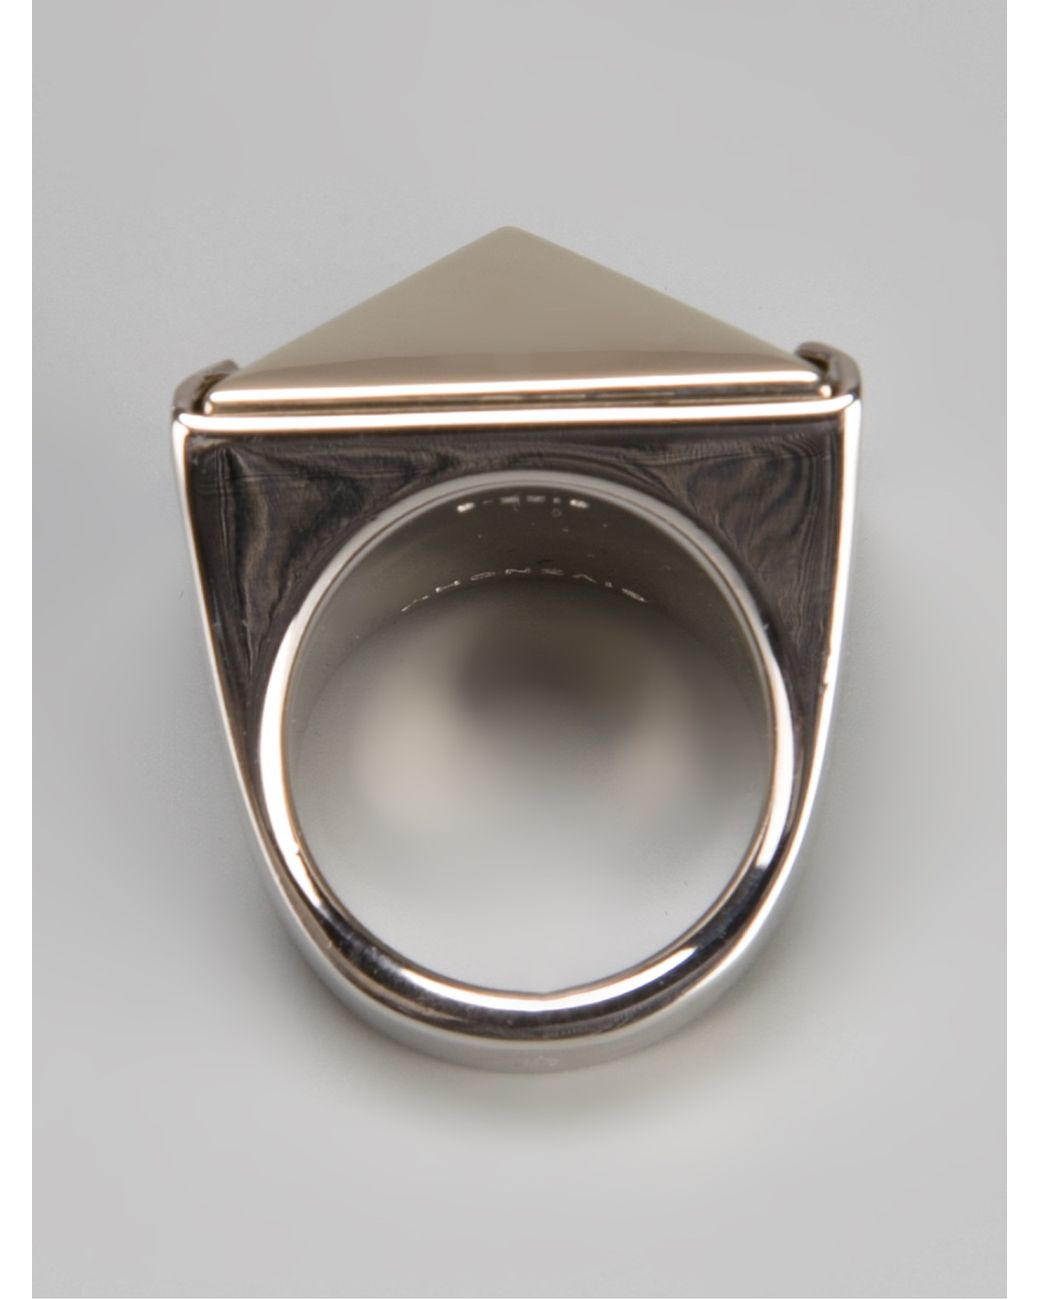 Givenchy Pyramid Stud Ring in Metallic | Lyst